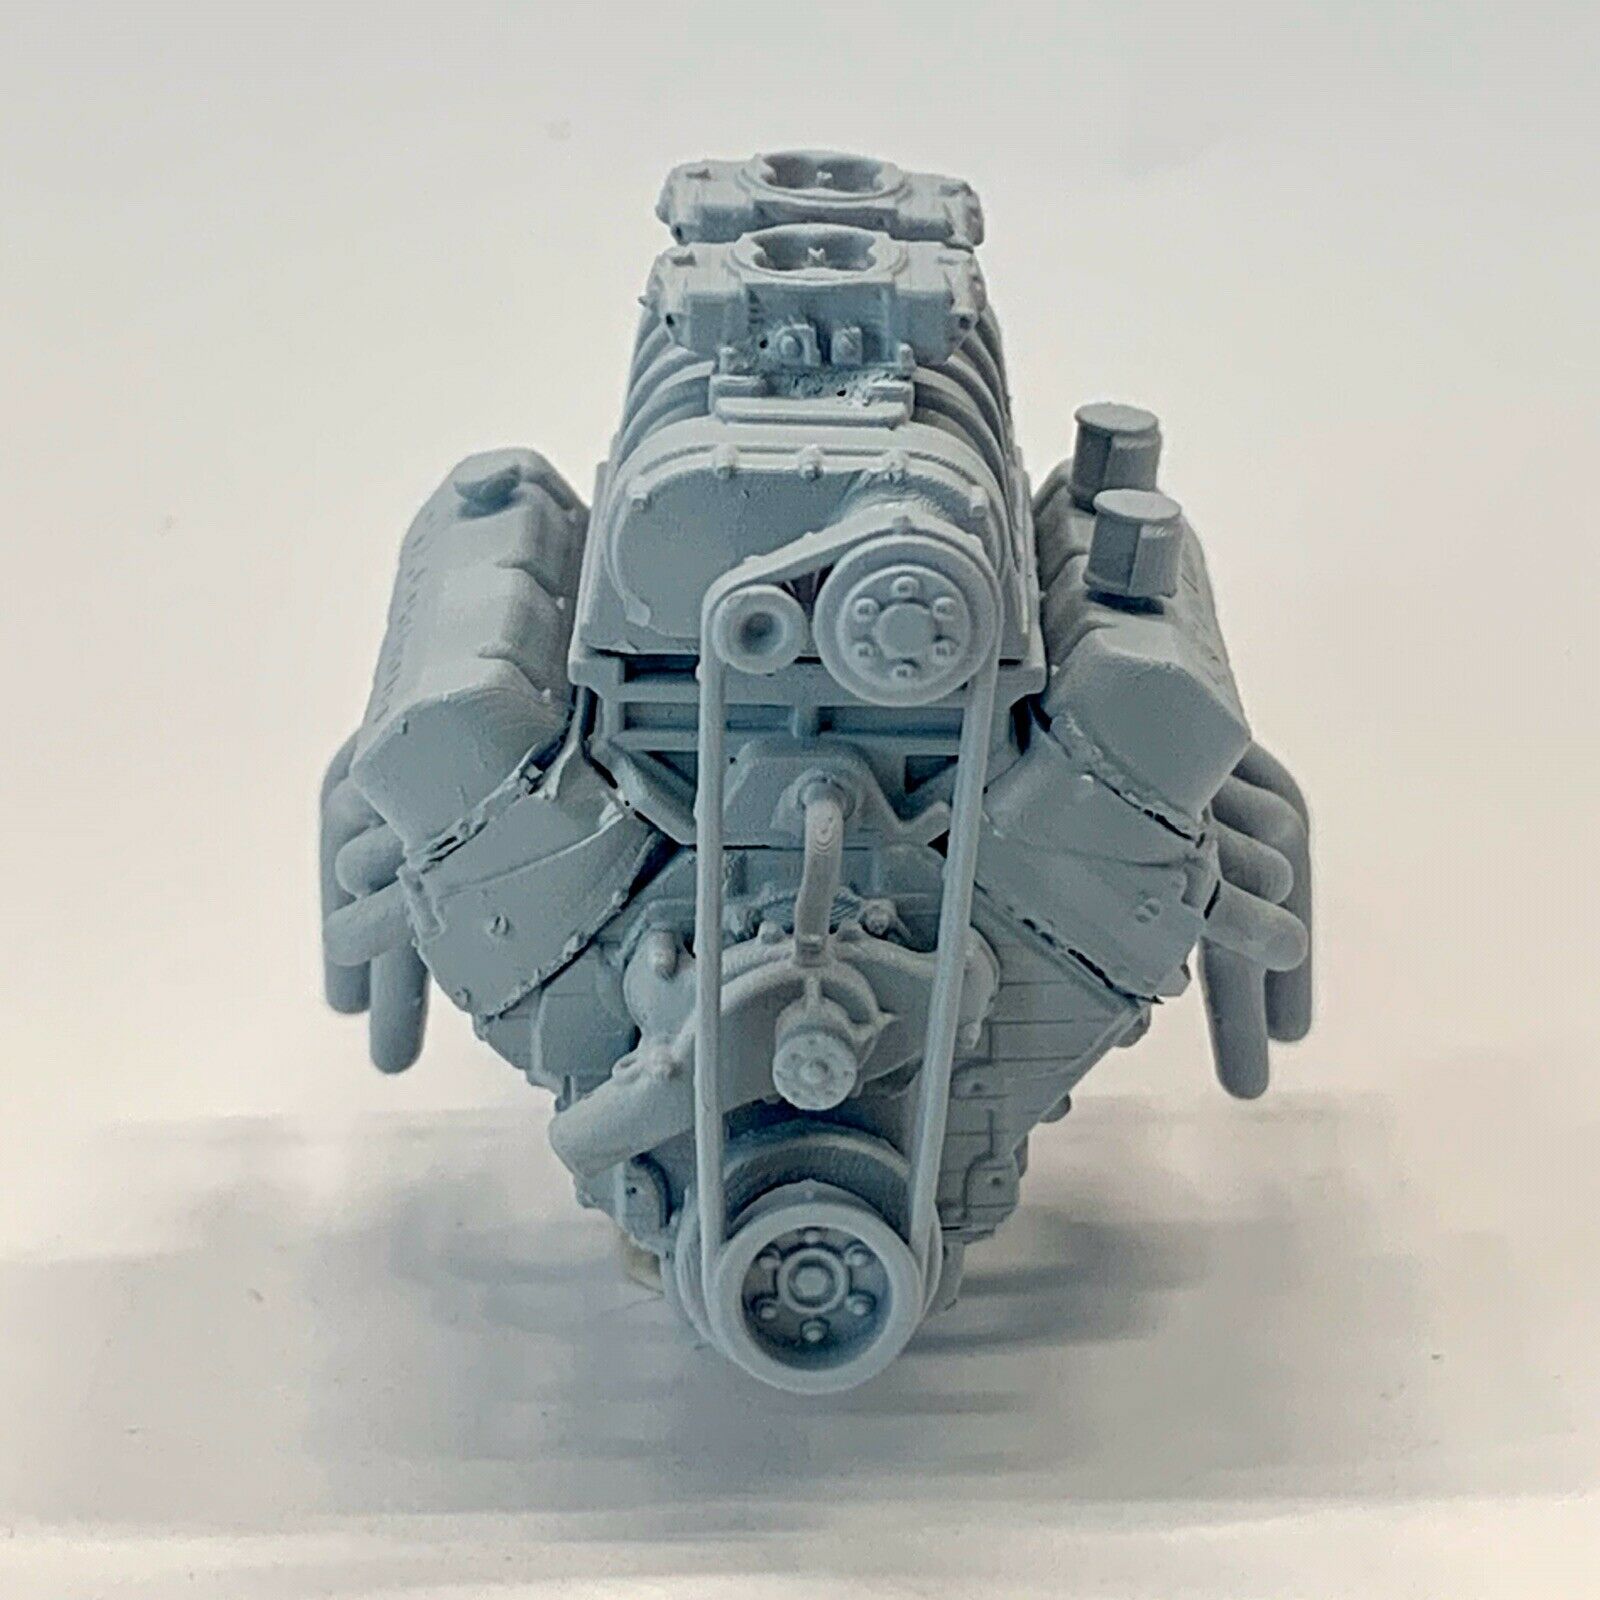 Blown 572 BBC model engine resin 3D printed 1:24-1:8 scale